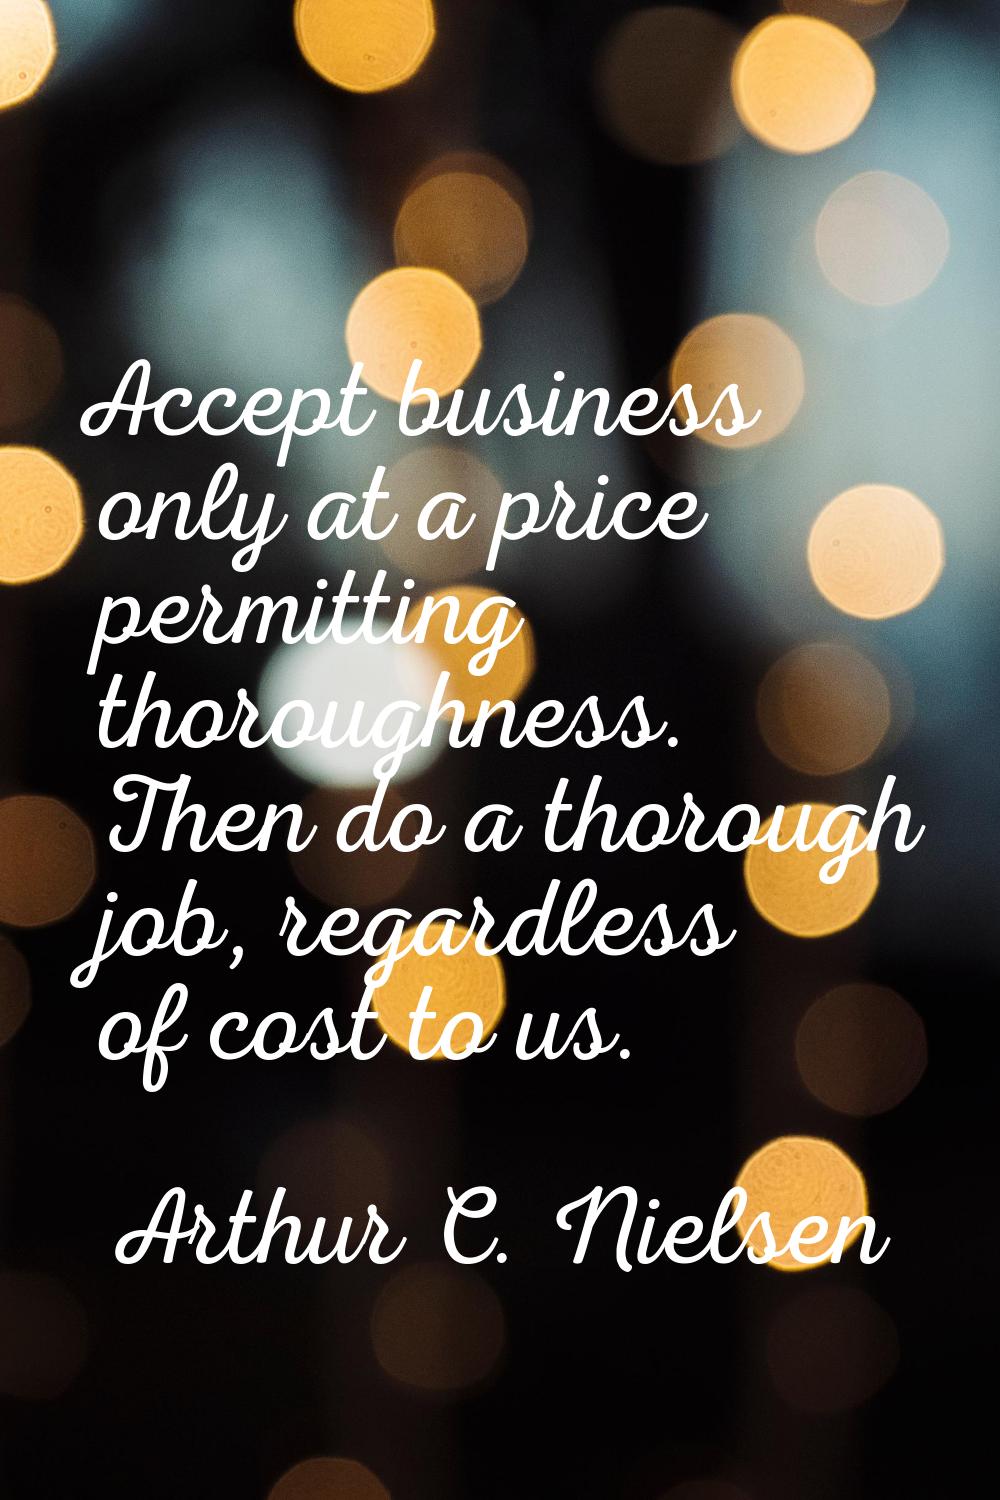 Accept business only at a price permitting thoroughness. Then do a thorough job, regardless of cost